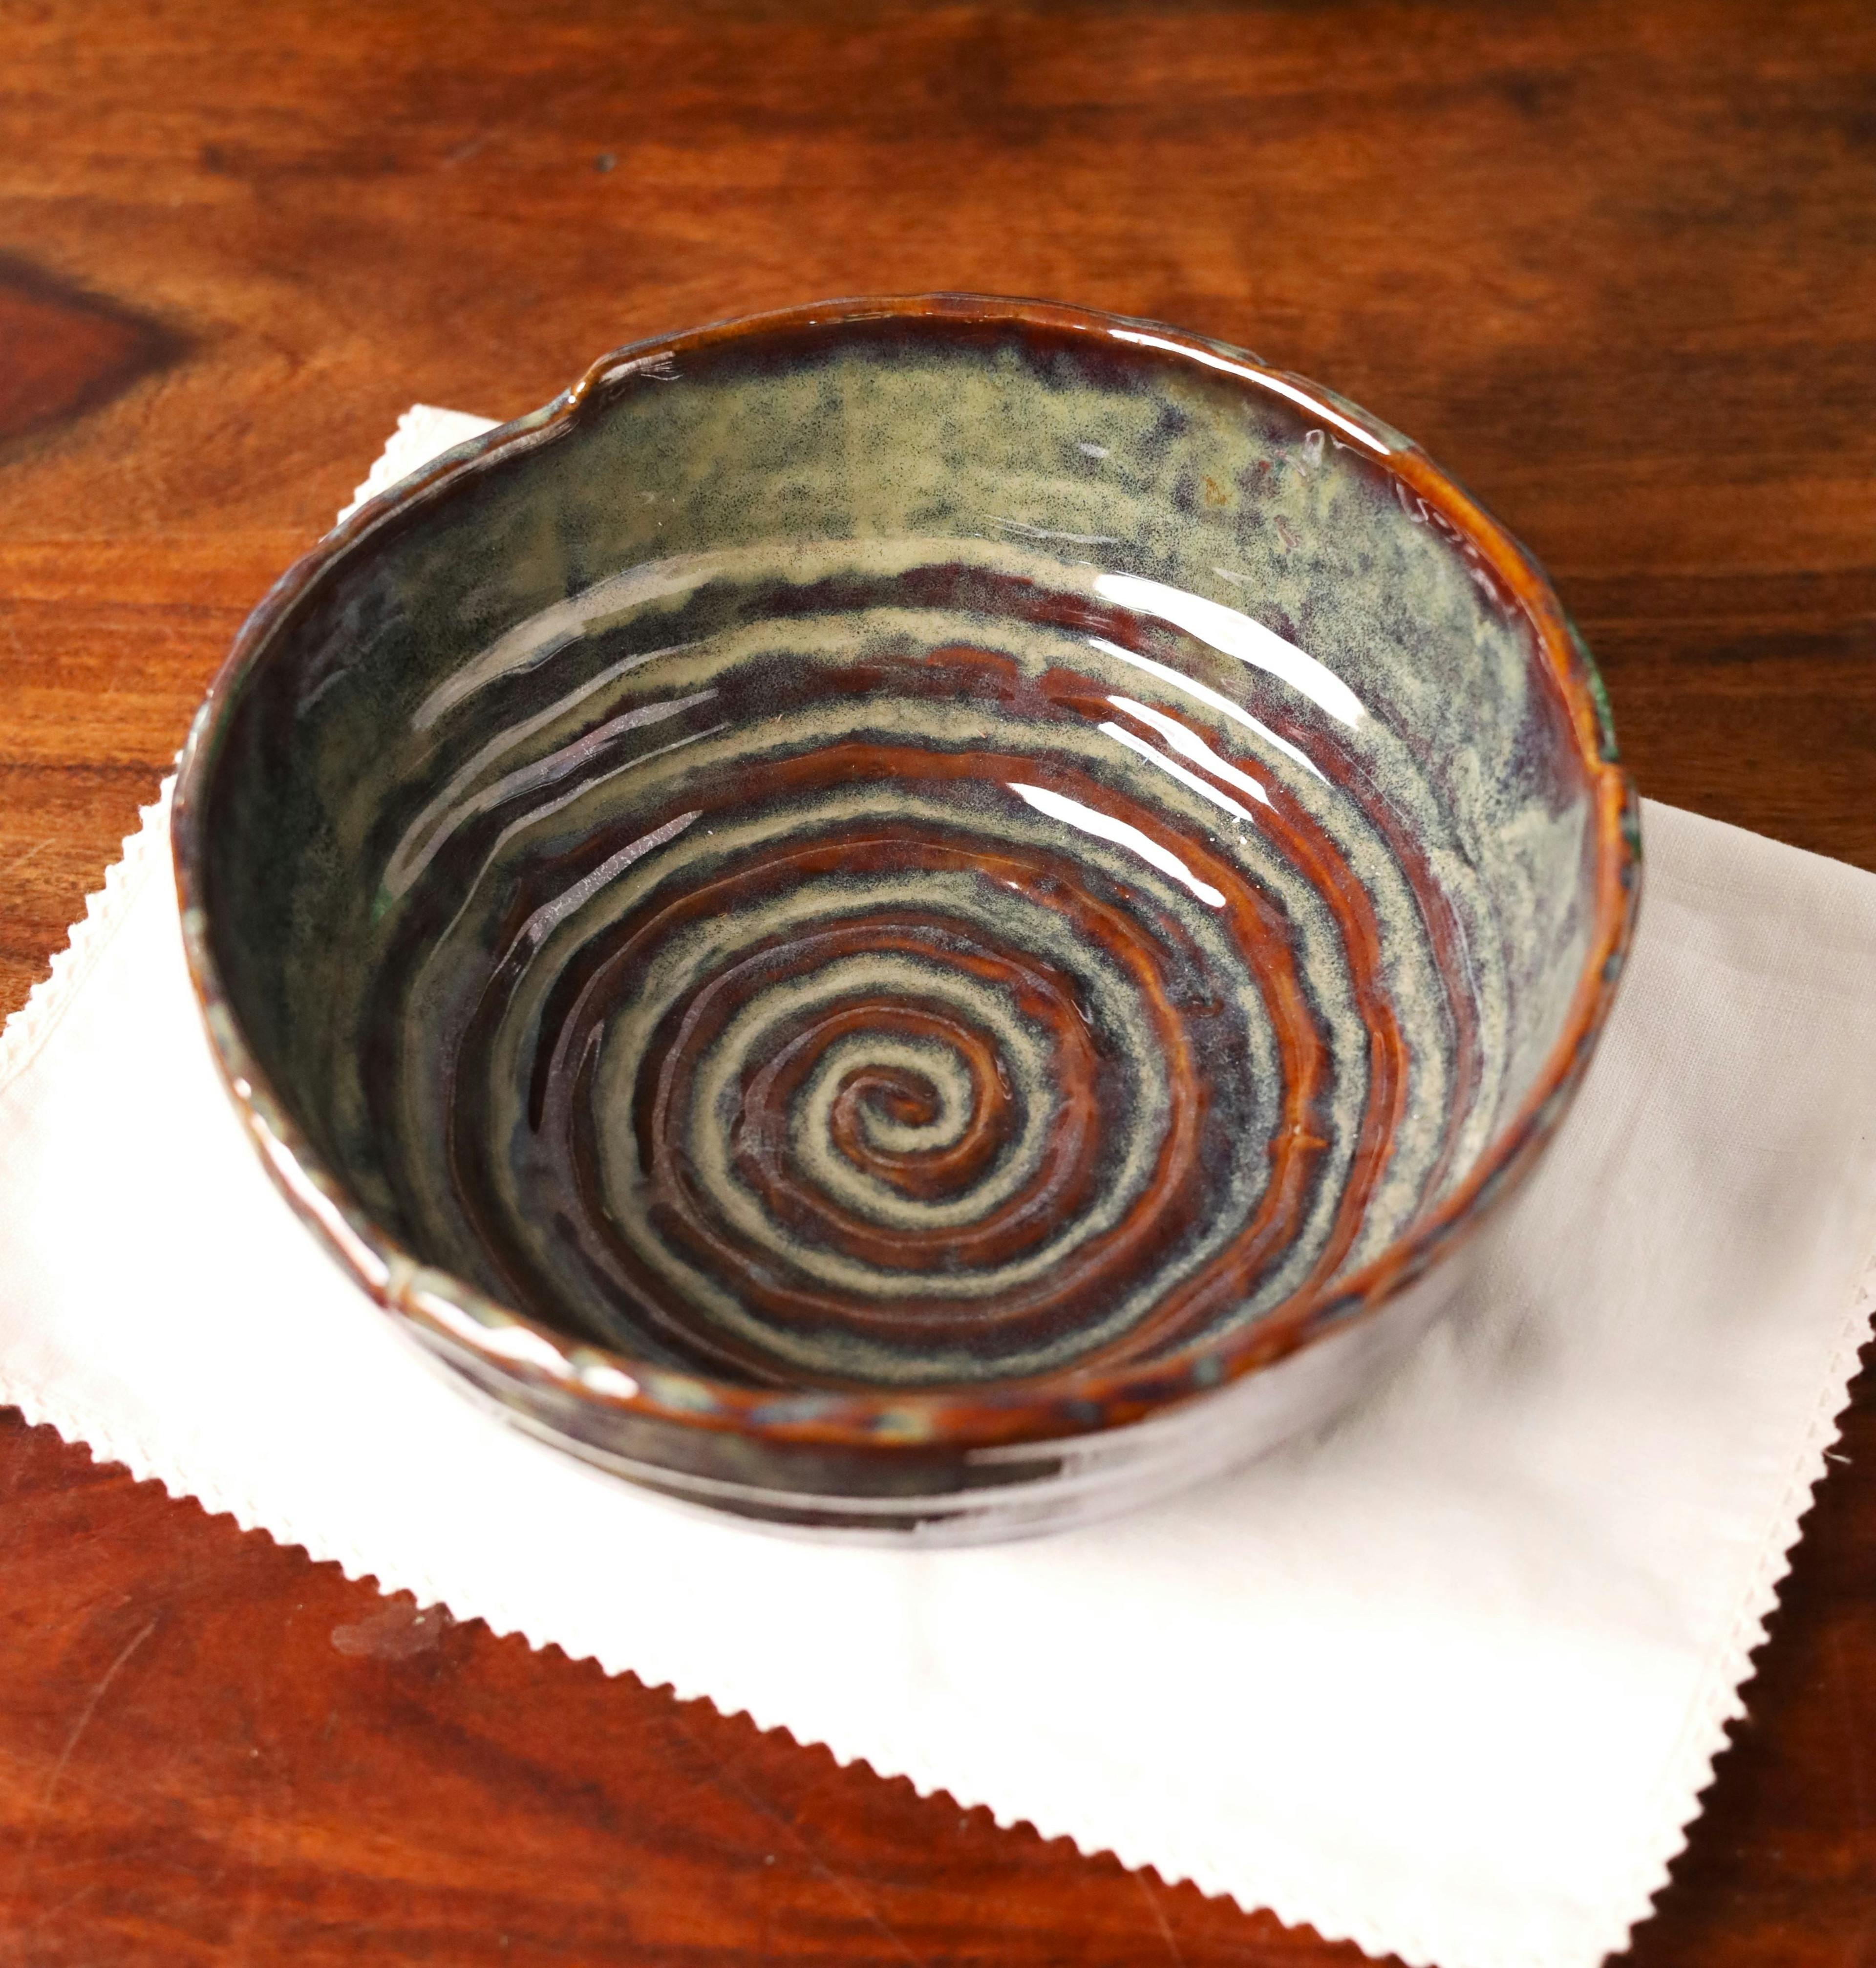 Kira Studio Pottery Handmade Serving Bowl Small, a product by Olive Home accent